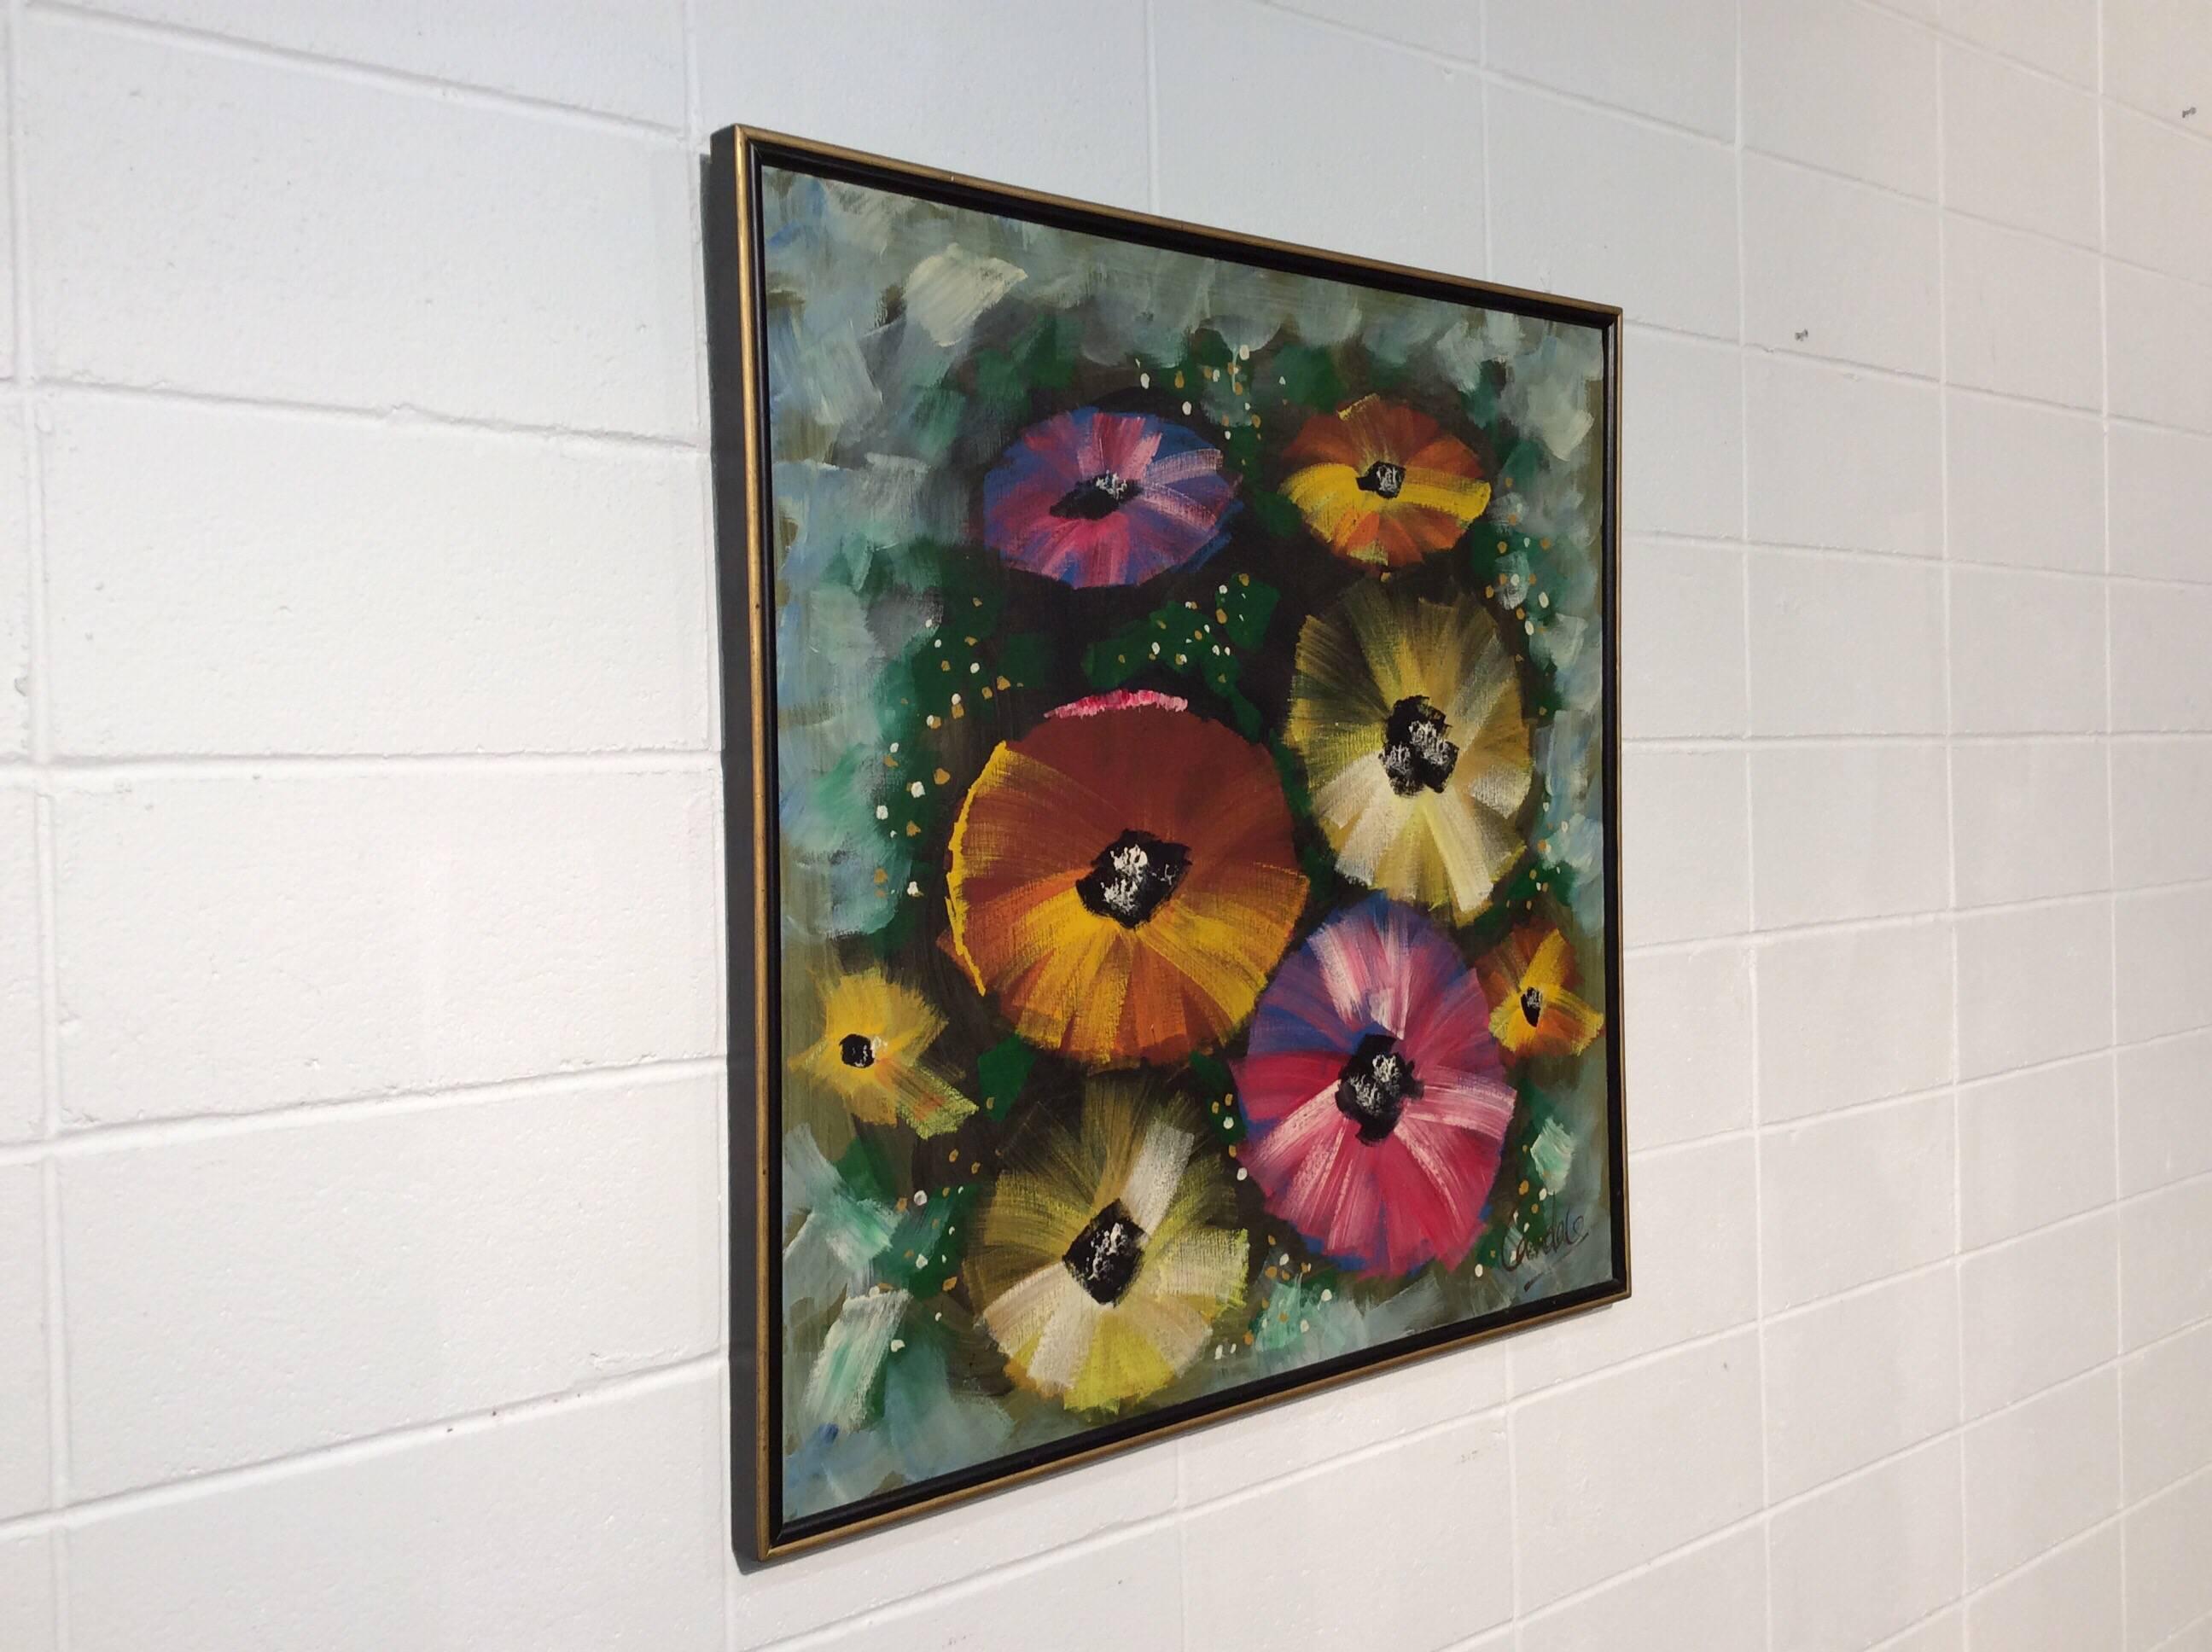 Midcentury abstract art depicting pansies. Bright and bold colors in this work of art really make it stand out. Signed in lower corner.
No known issues that work detract from value or aesthetics
Ready to hang.